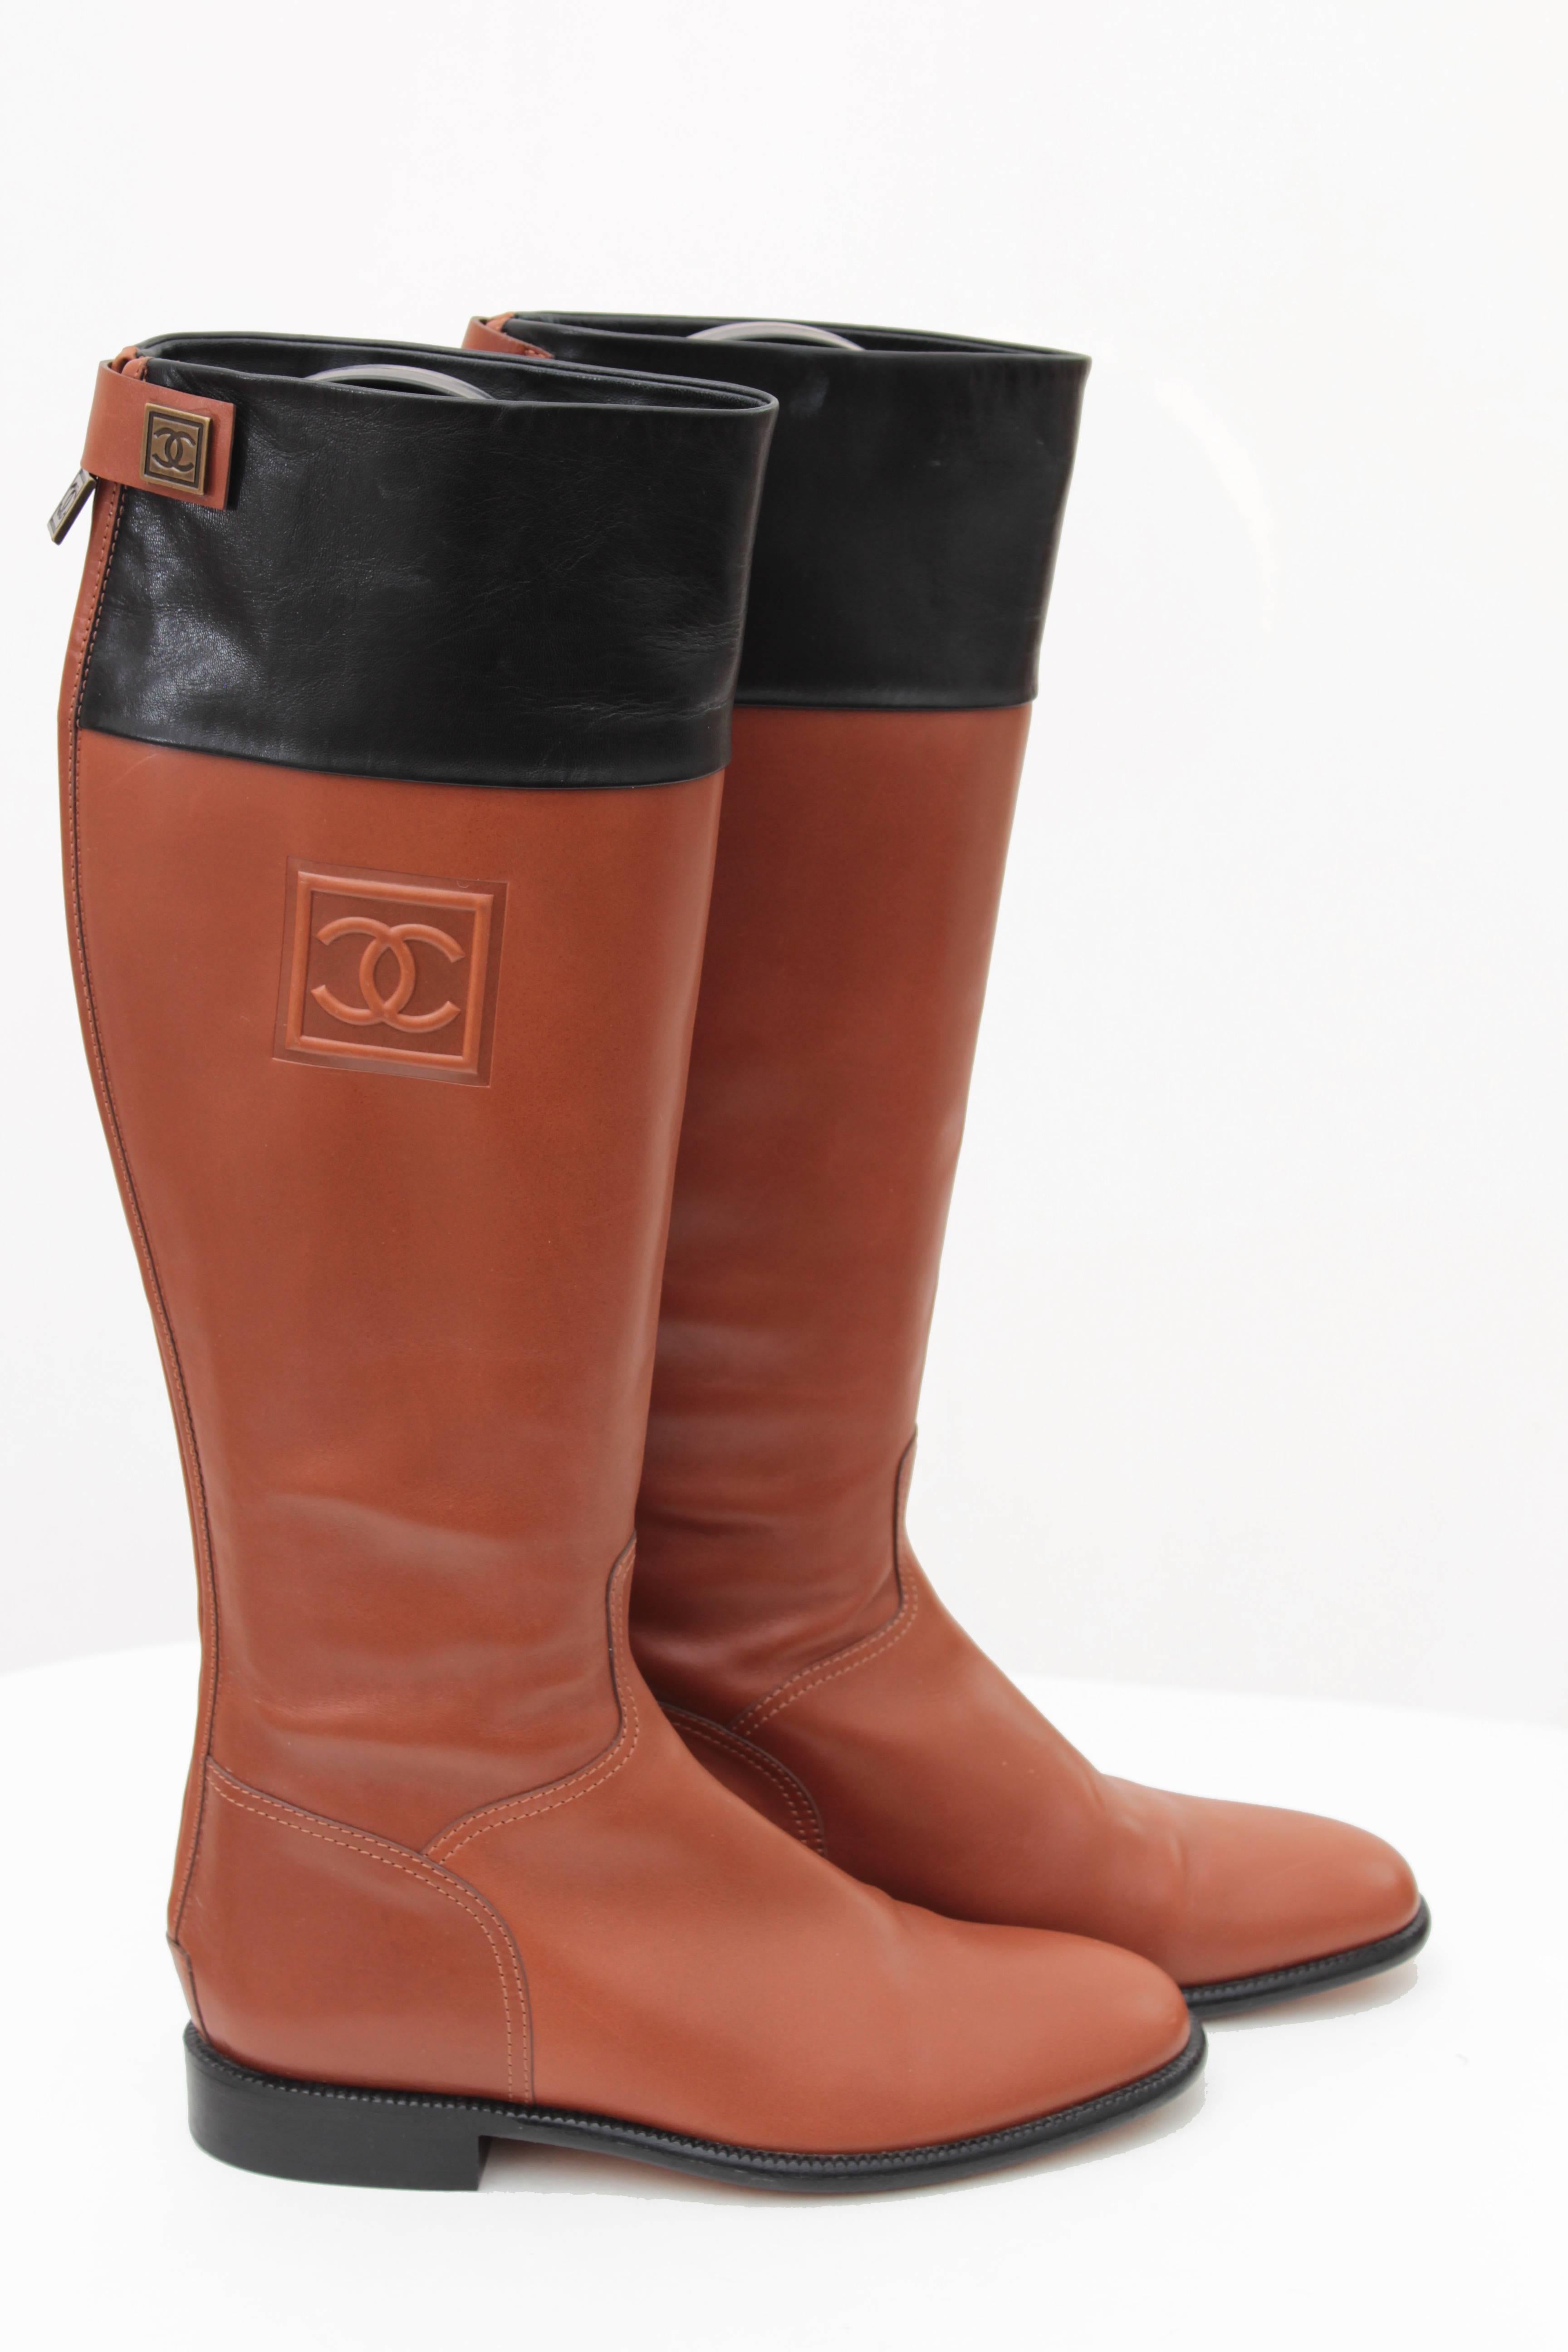 Here's a pair of riding boots from Chanel.  Made from black and tan leather, they fasten in back with zippers and CC logo snaps.  In excellent condition, with minor wear to the soles.  Come in their original box (note that box has dings and damage)